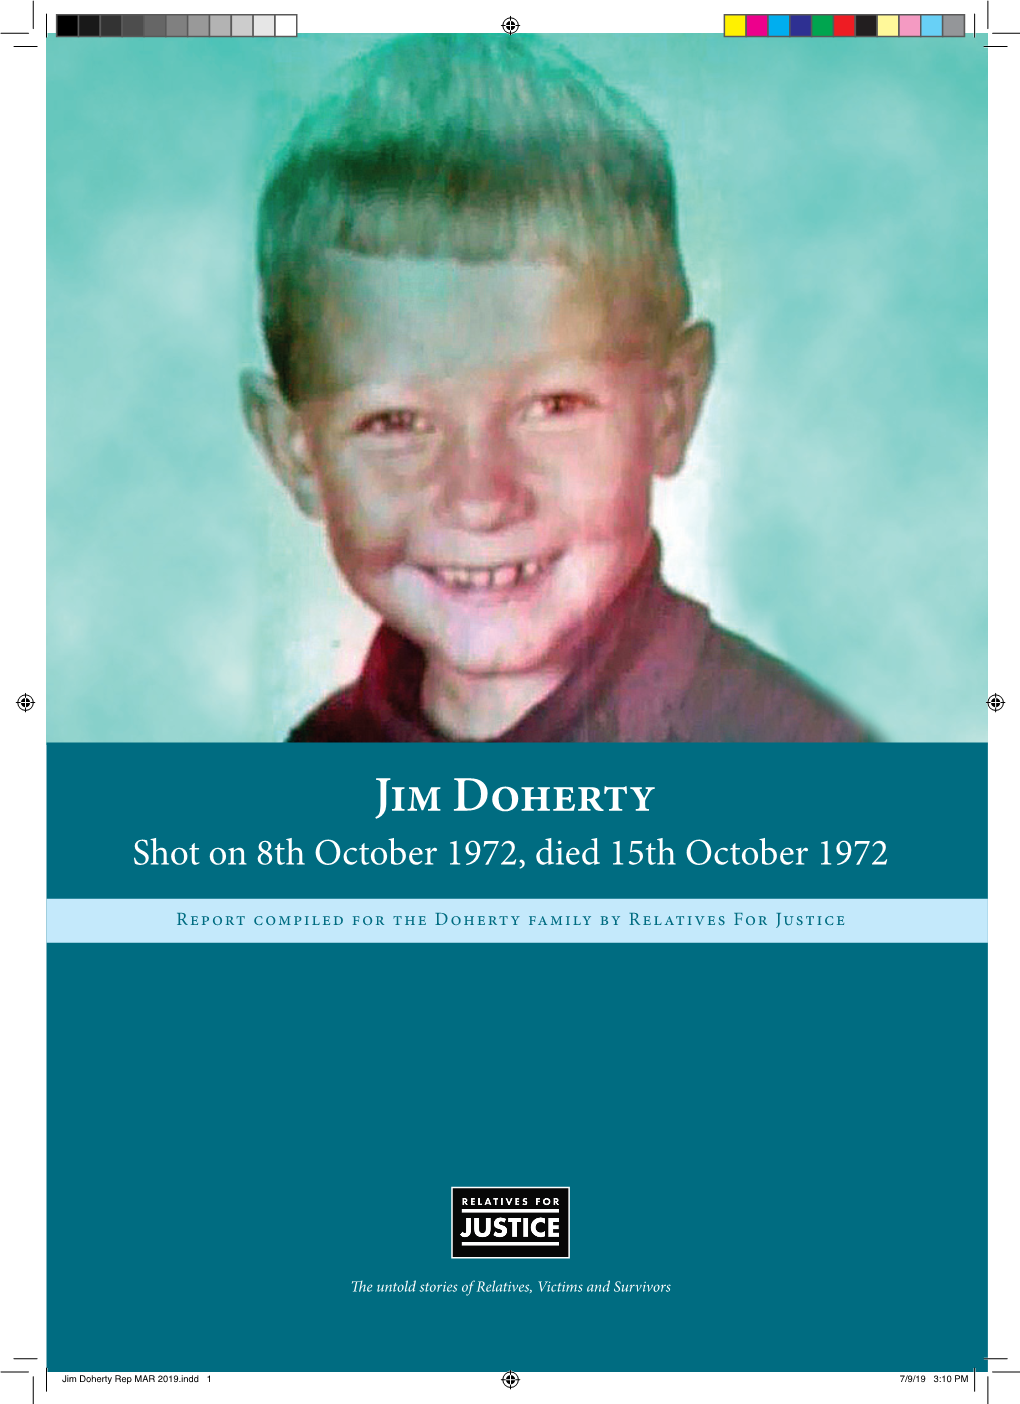 Jim Doherty Shot on 8Th October 1972, Died 15Th October 1972